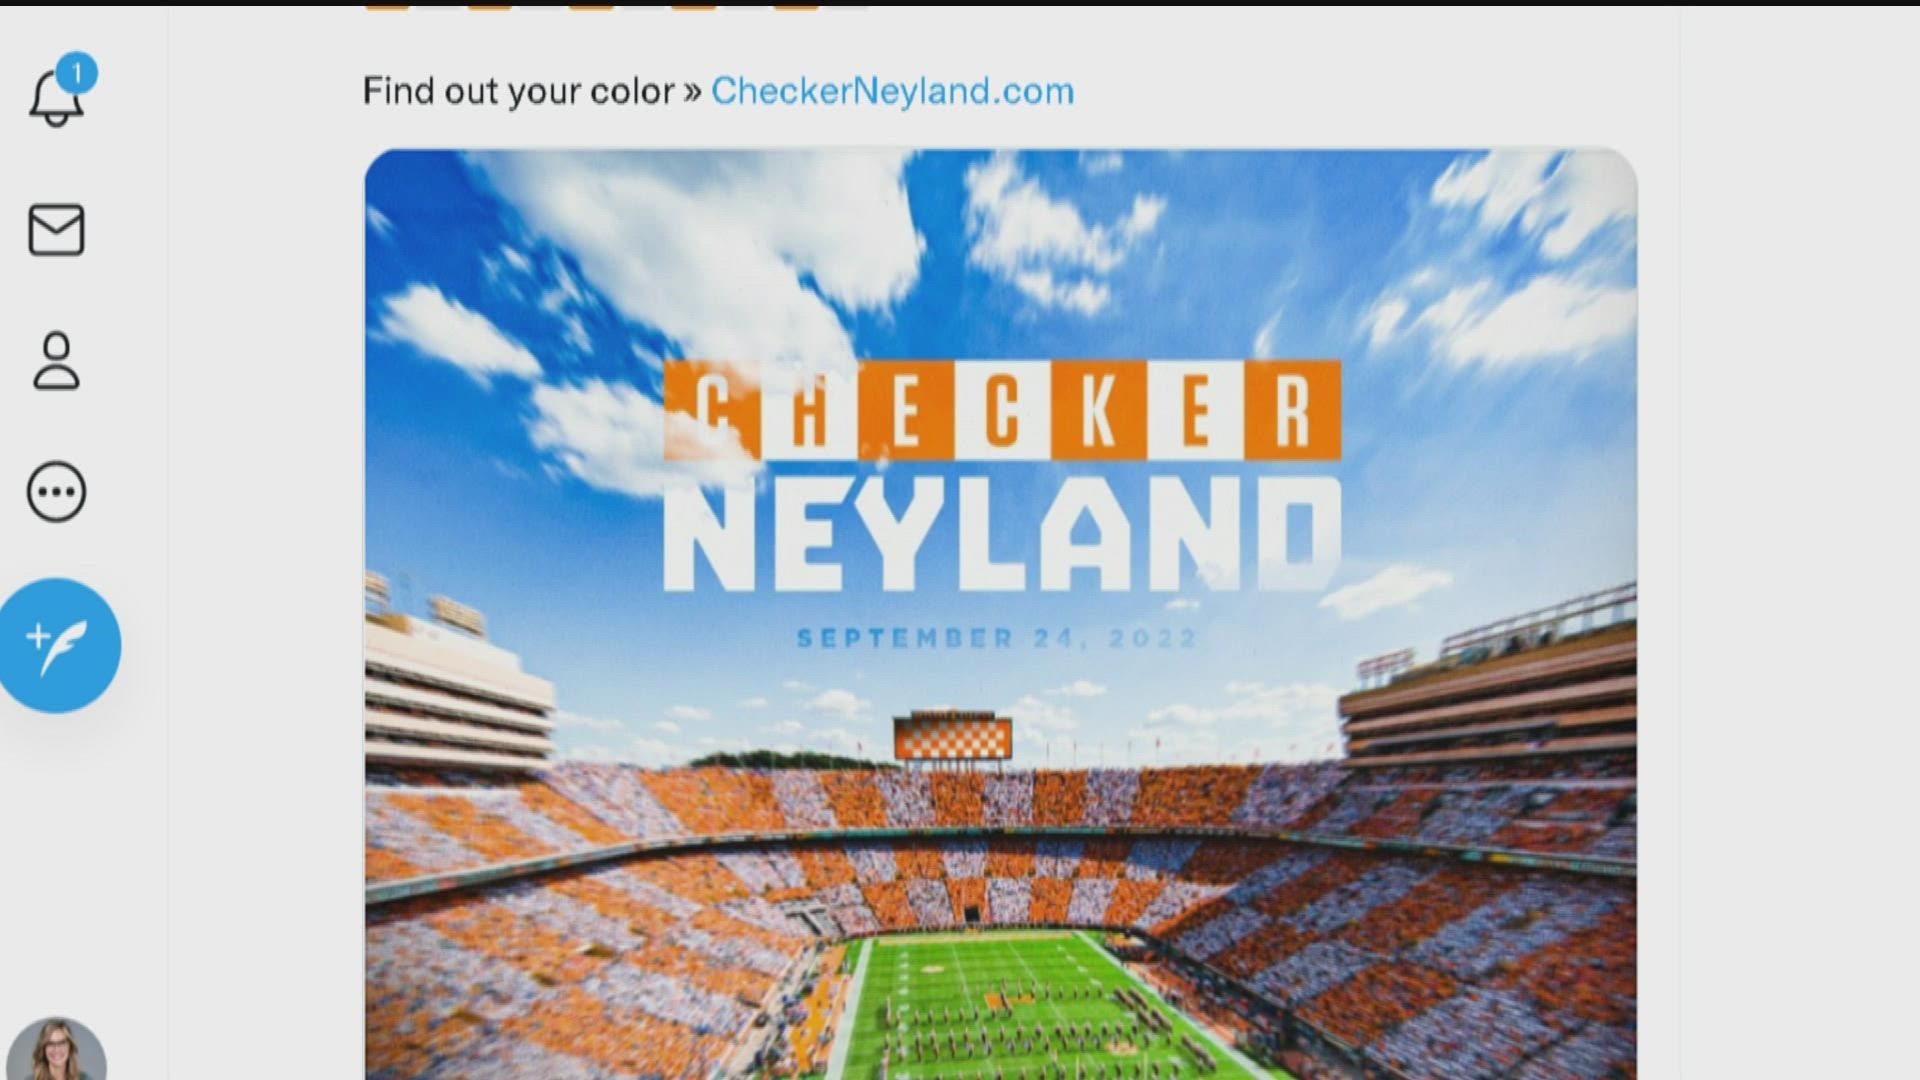 Fans are asked to either dress up in orange or white depending on their seats to give us that signature checkerboard pattern we all love!